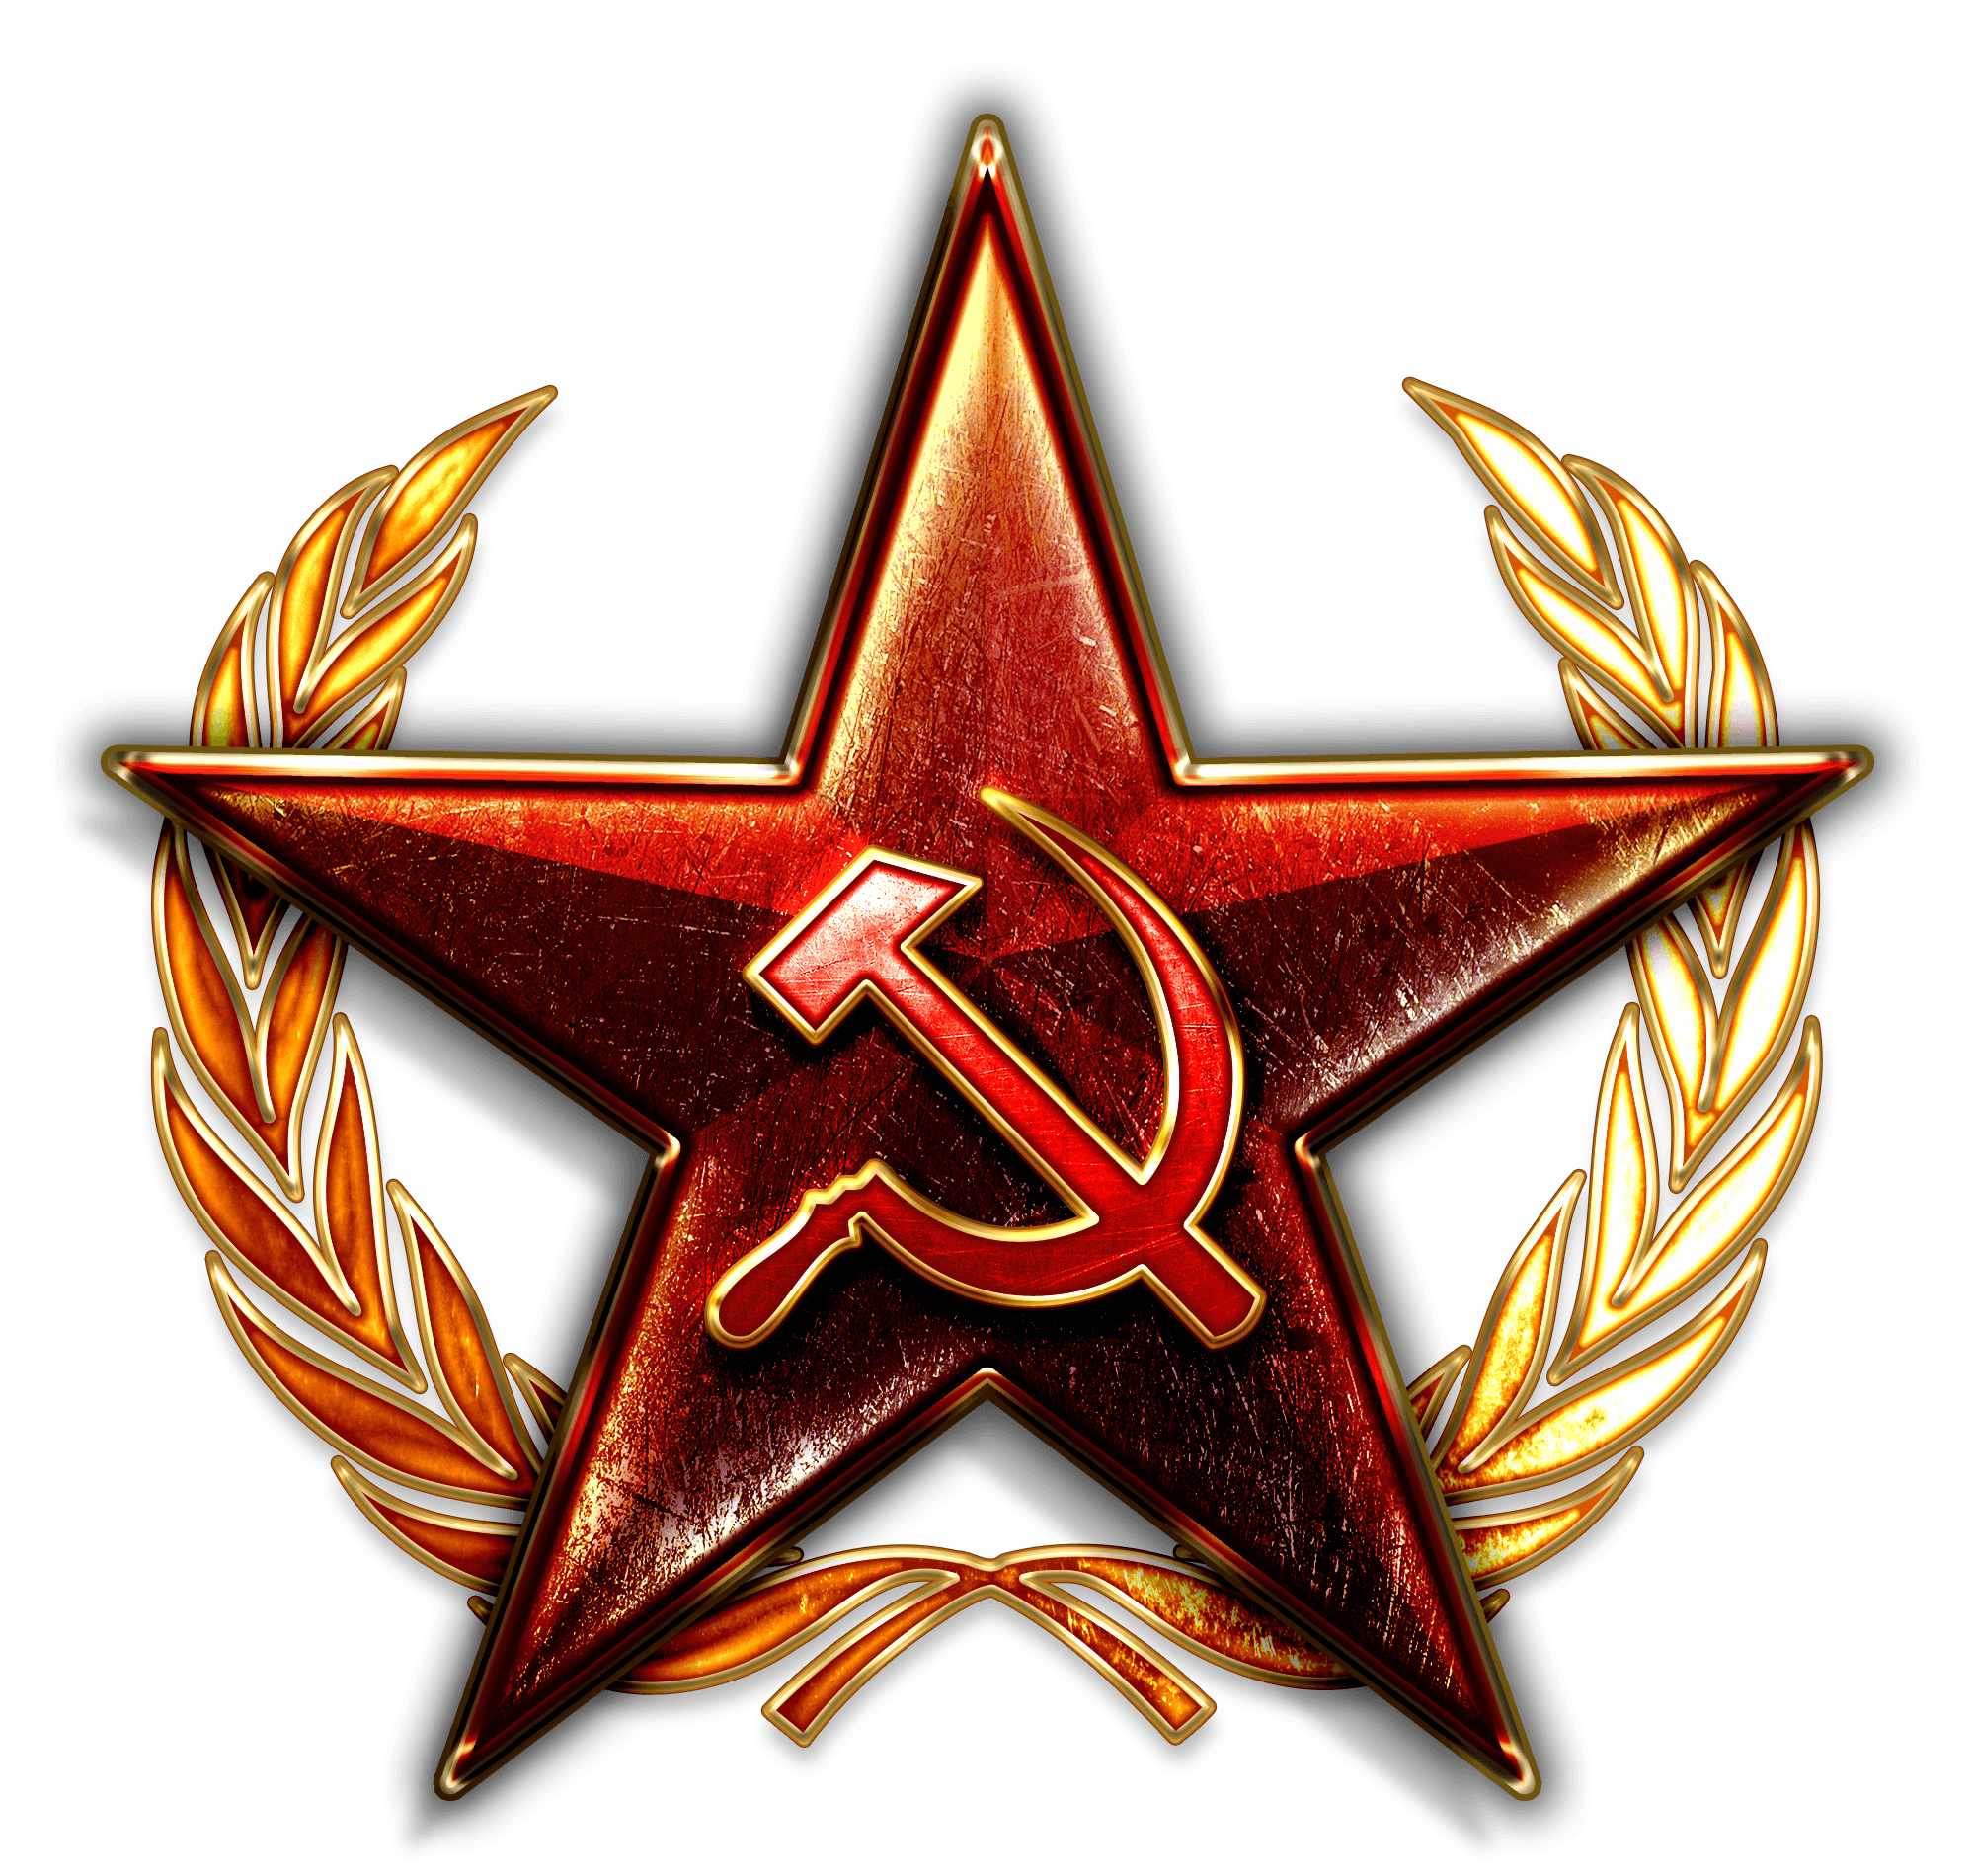 Warsaw Pact Logo - Final Warsaw Pact faction logo image - Red March - Indie DB